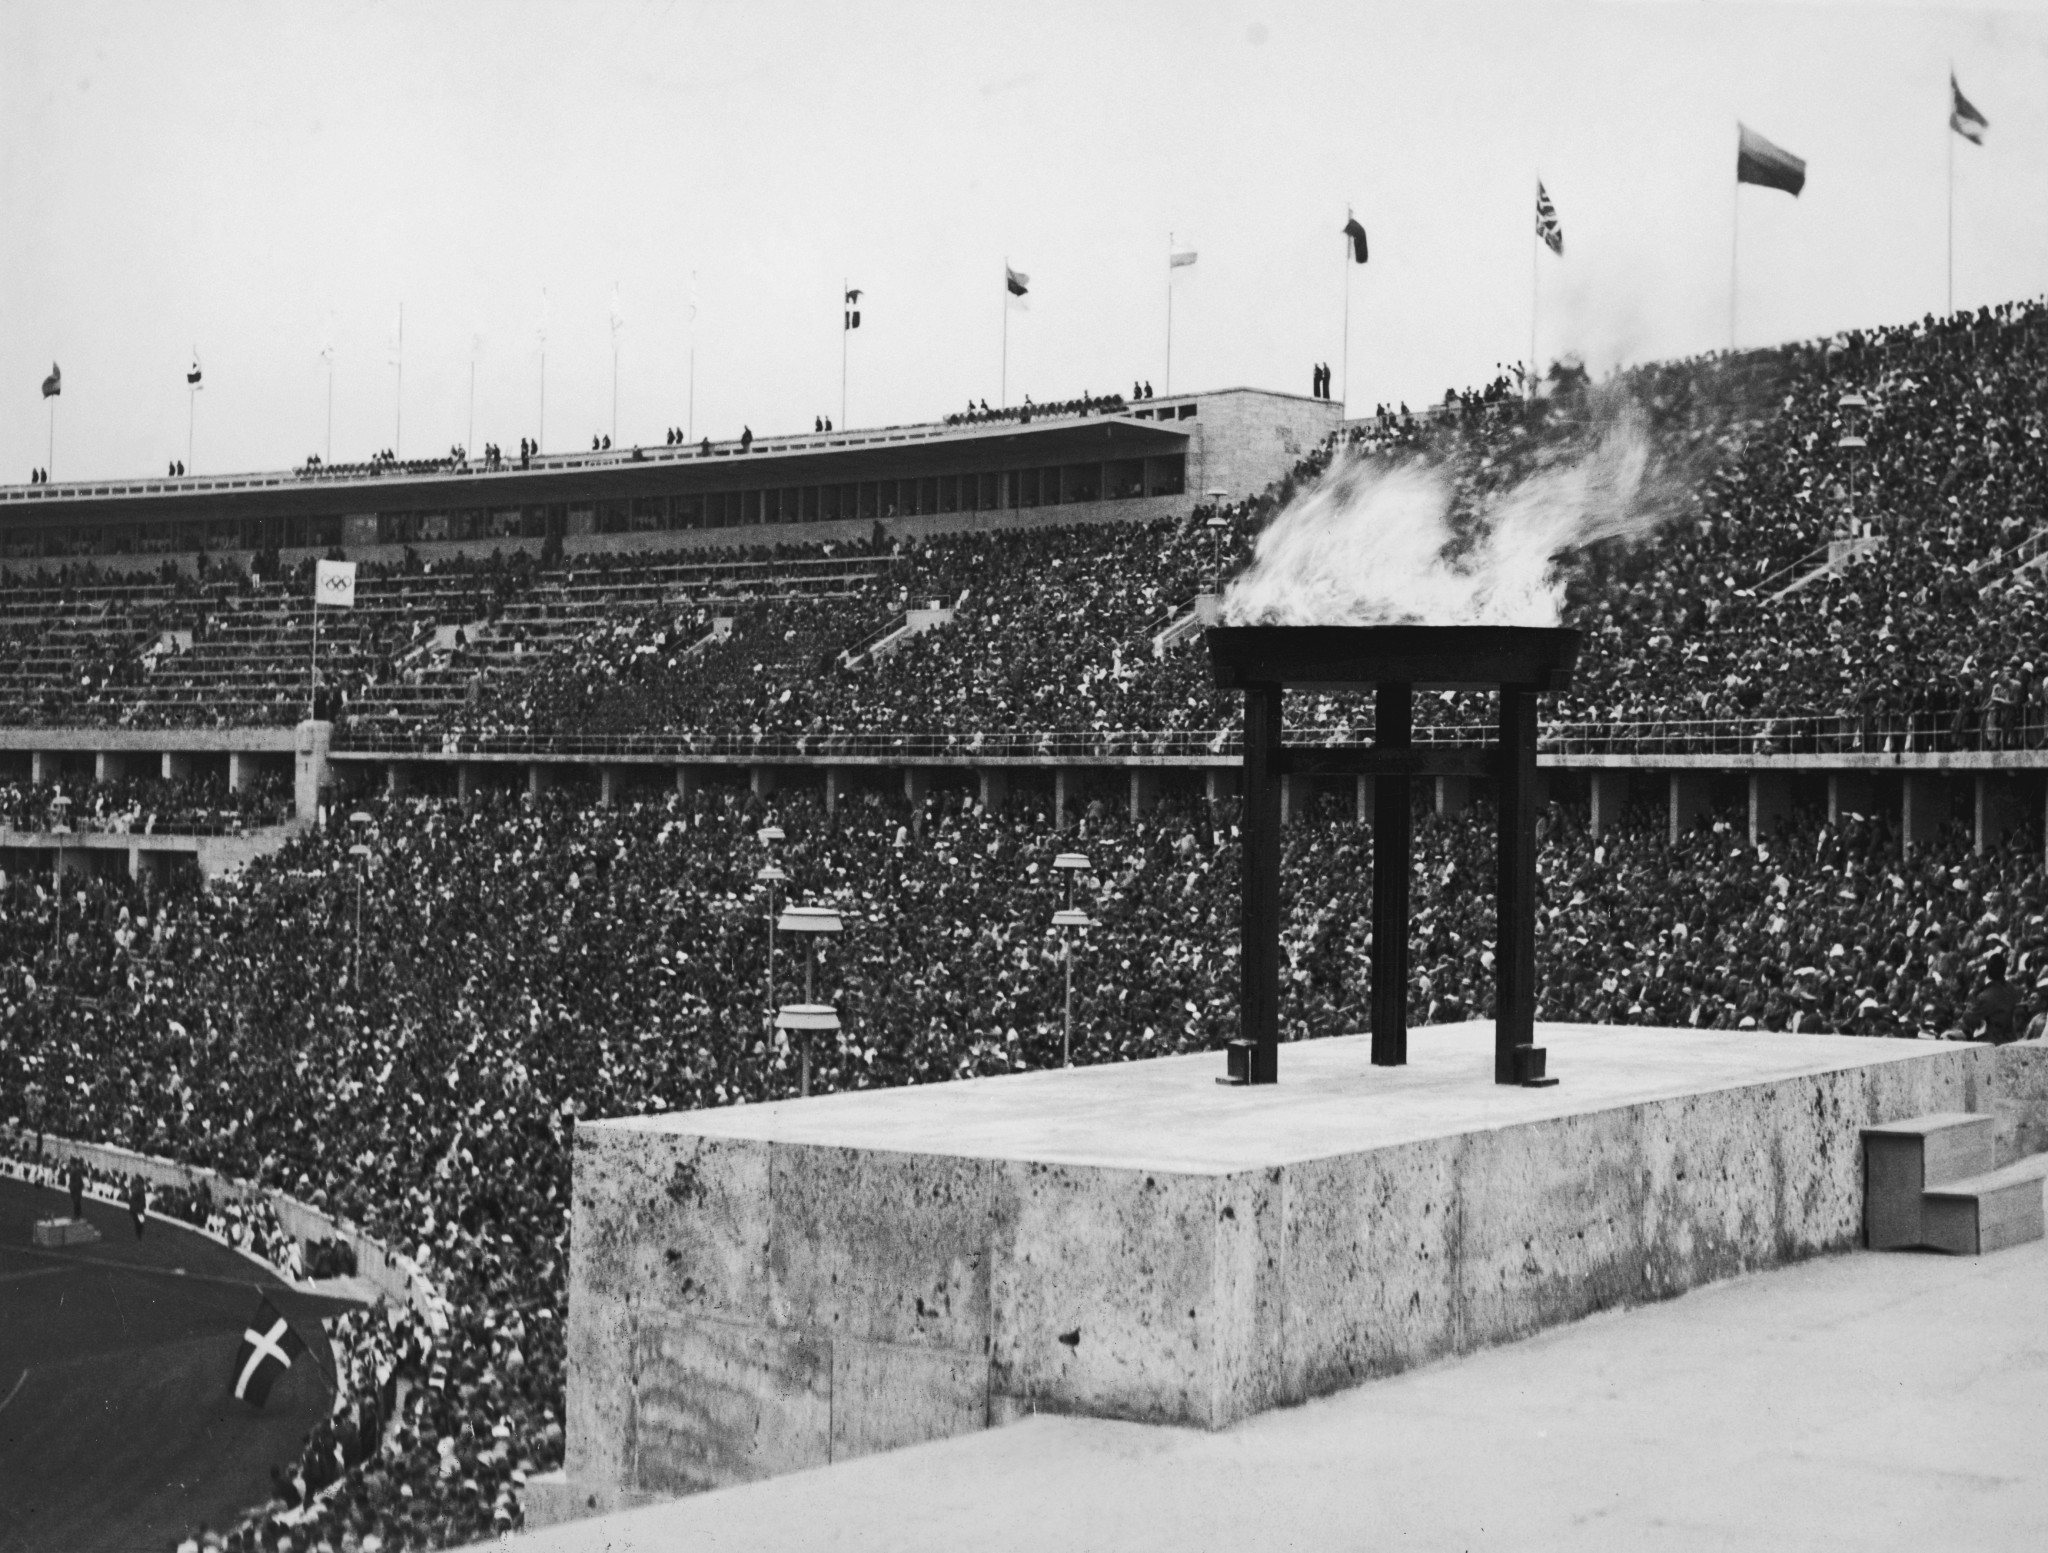 Helsinki Organisers hoped that the Olympic Flame would also burn in the previous host city of Berlin during the 1940 Games ©Getty Images